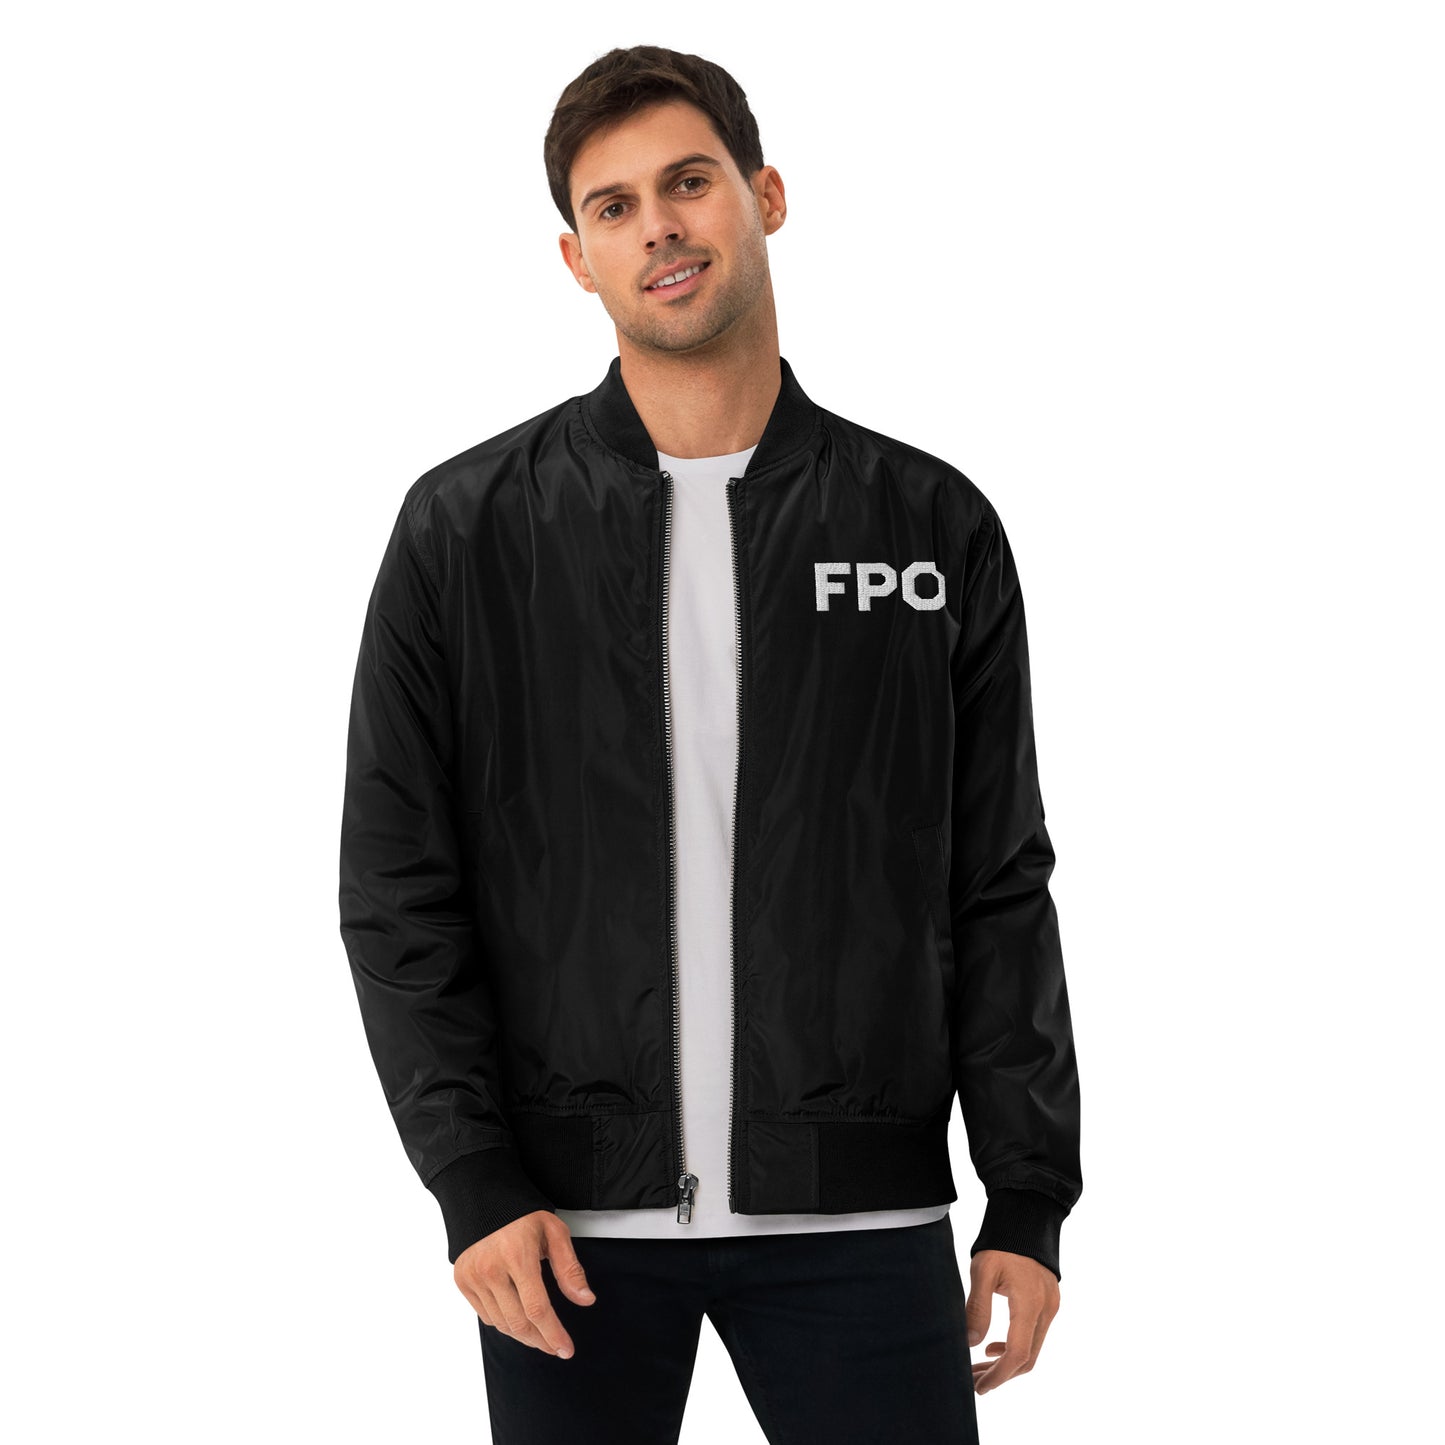 FPO Embroidered Premium recycled bomber jacket